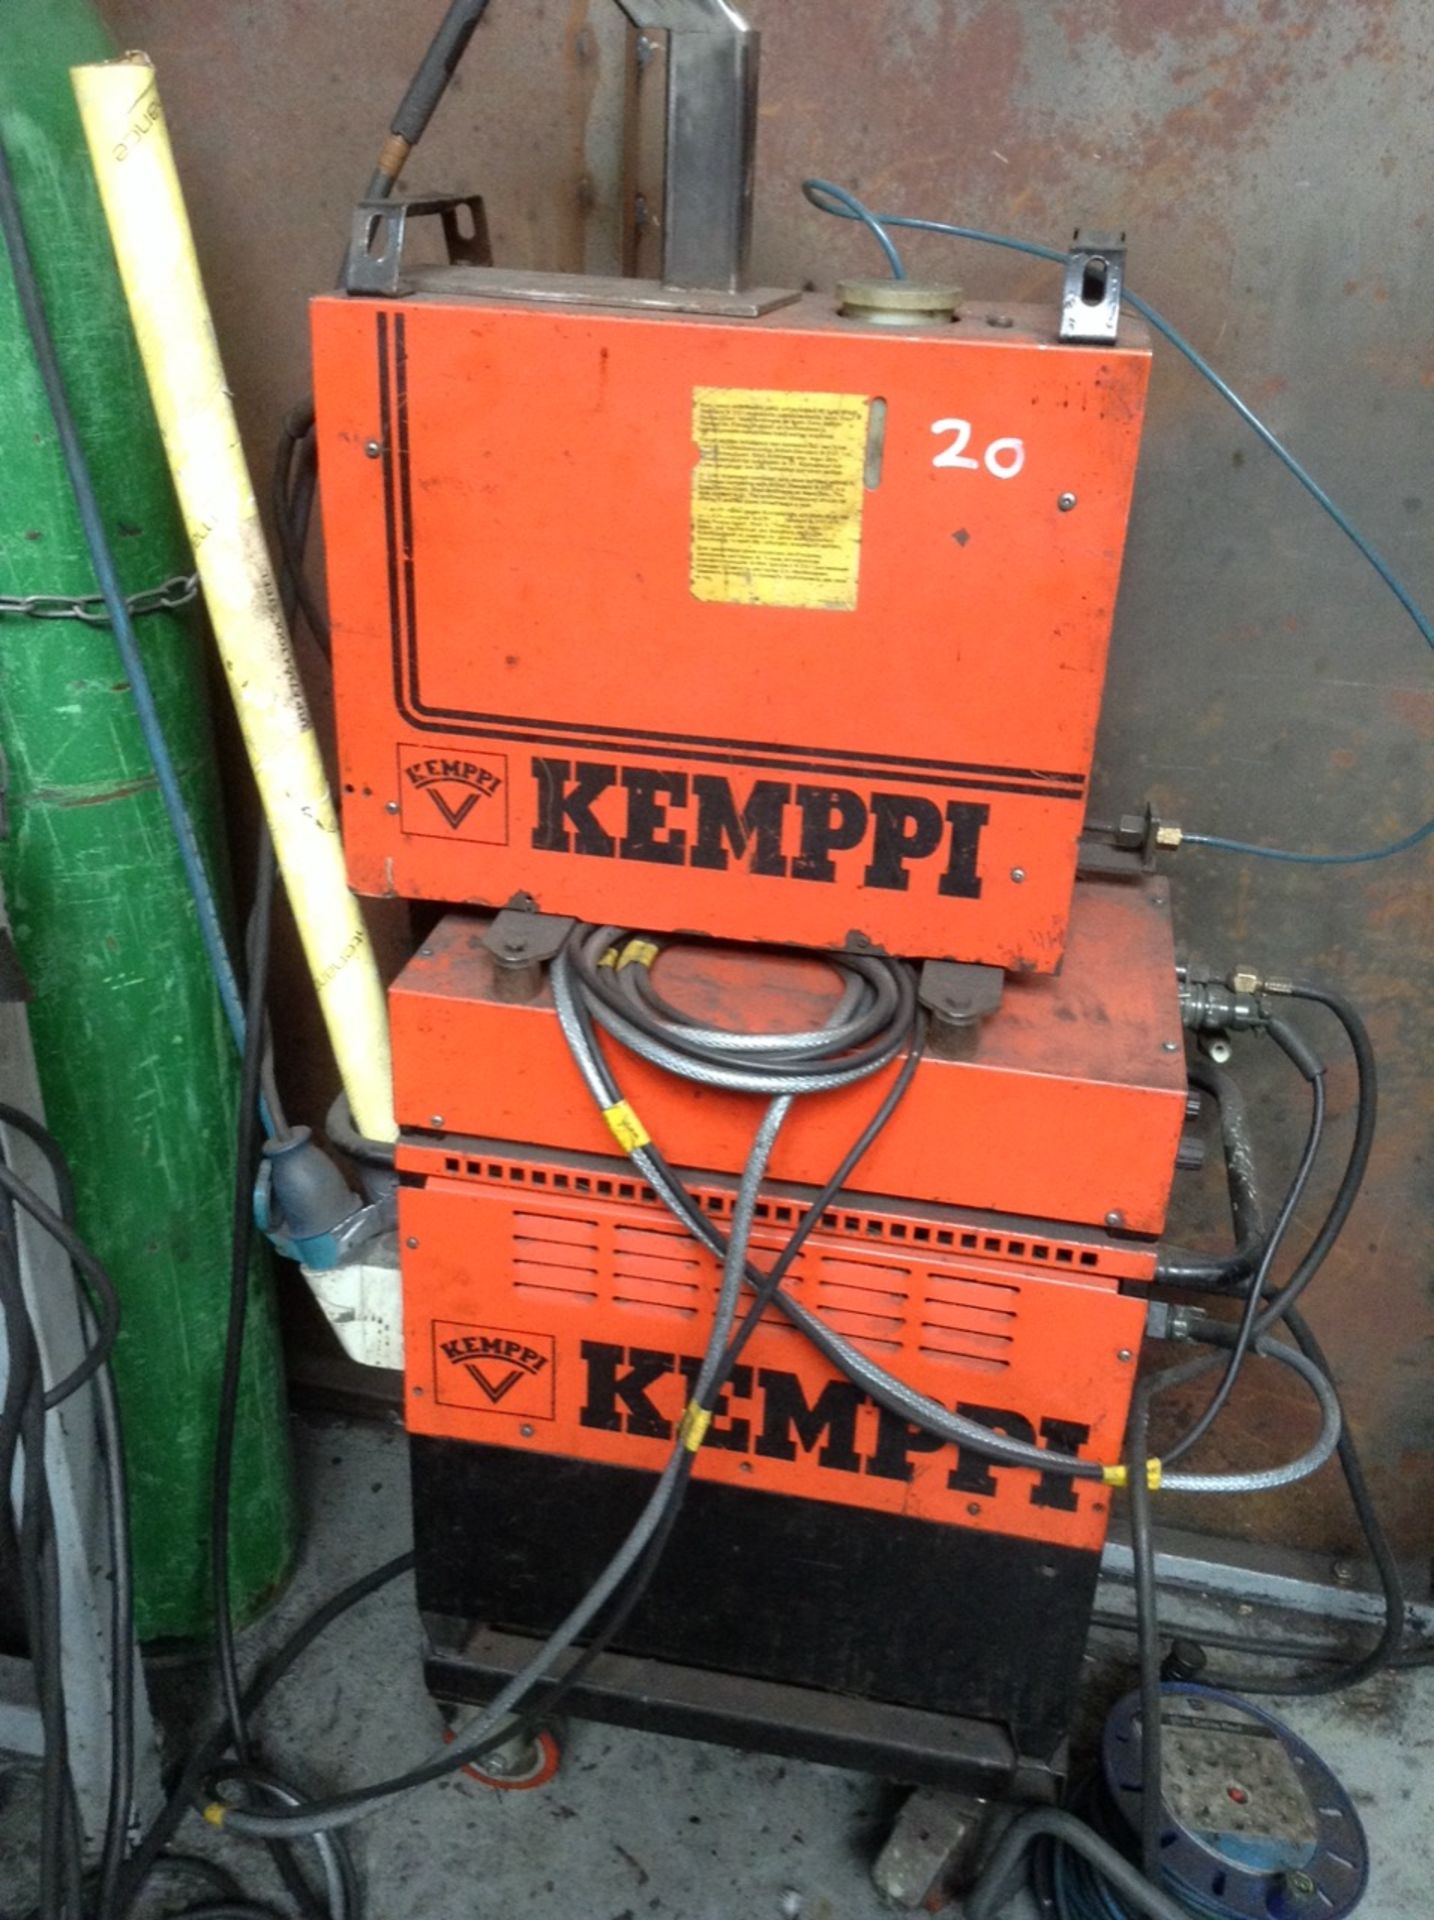 1 Kemppi , Kempack 200, Mig welder with WU-10 cooler, cables, foot controller and an Esab Buddy Arc